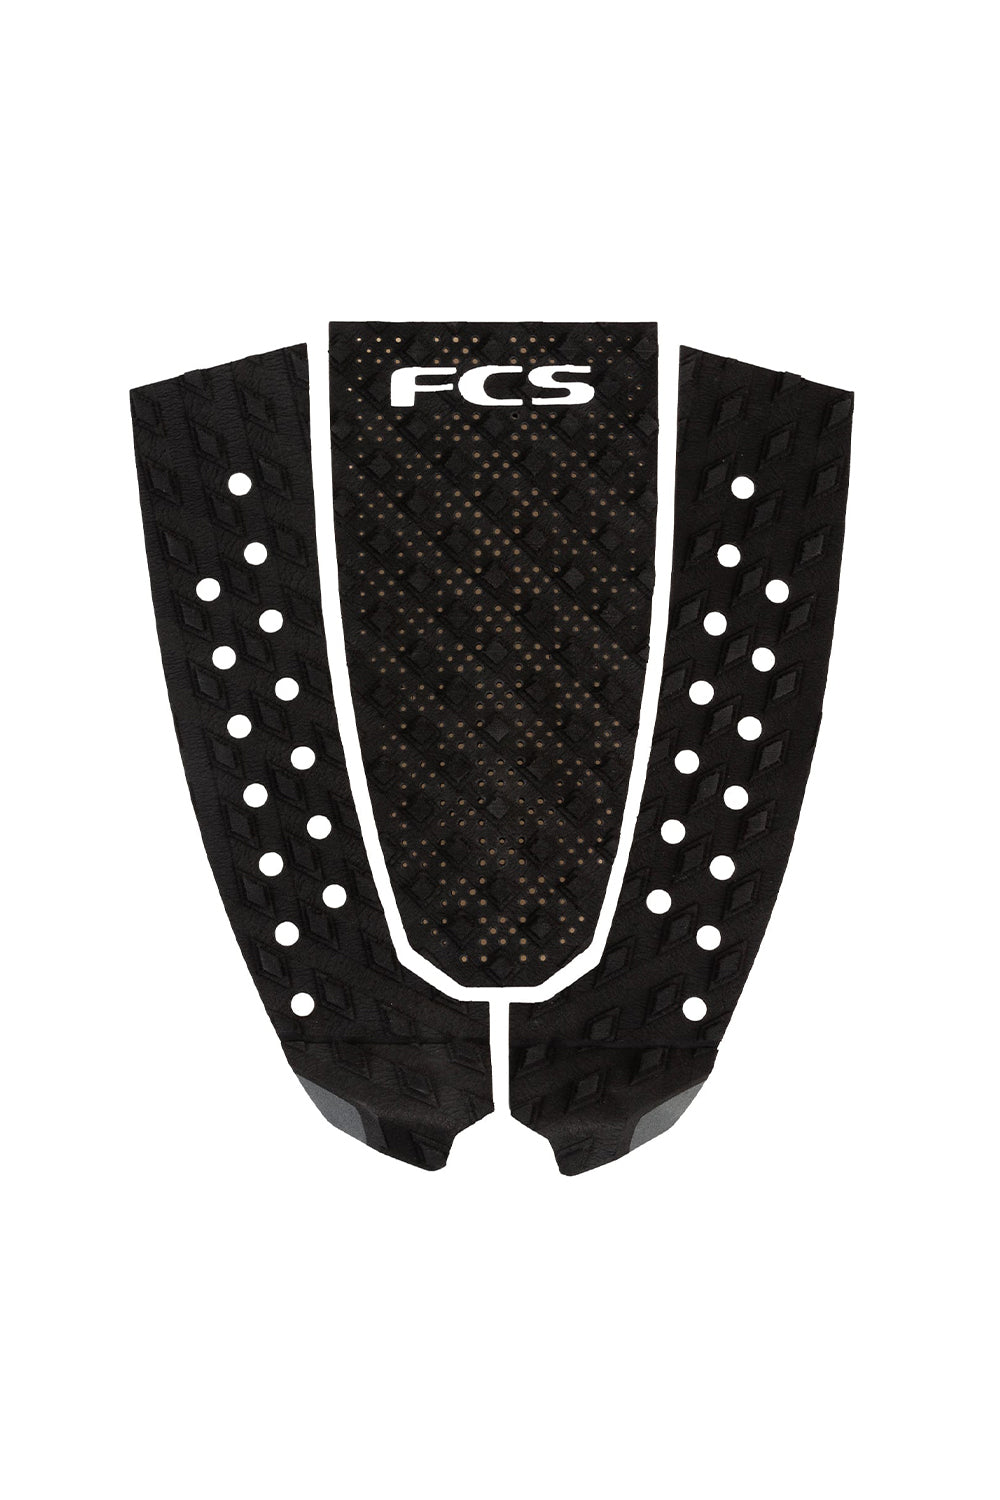 FCS T3 Pin Eco Traction